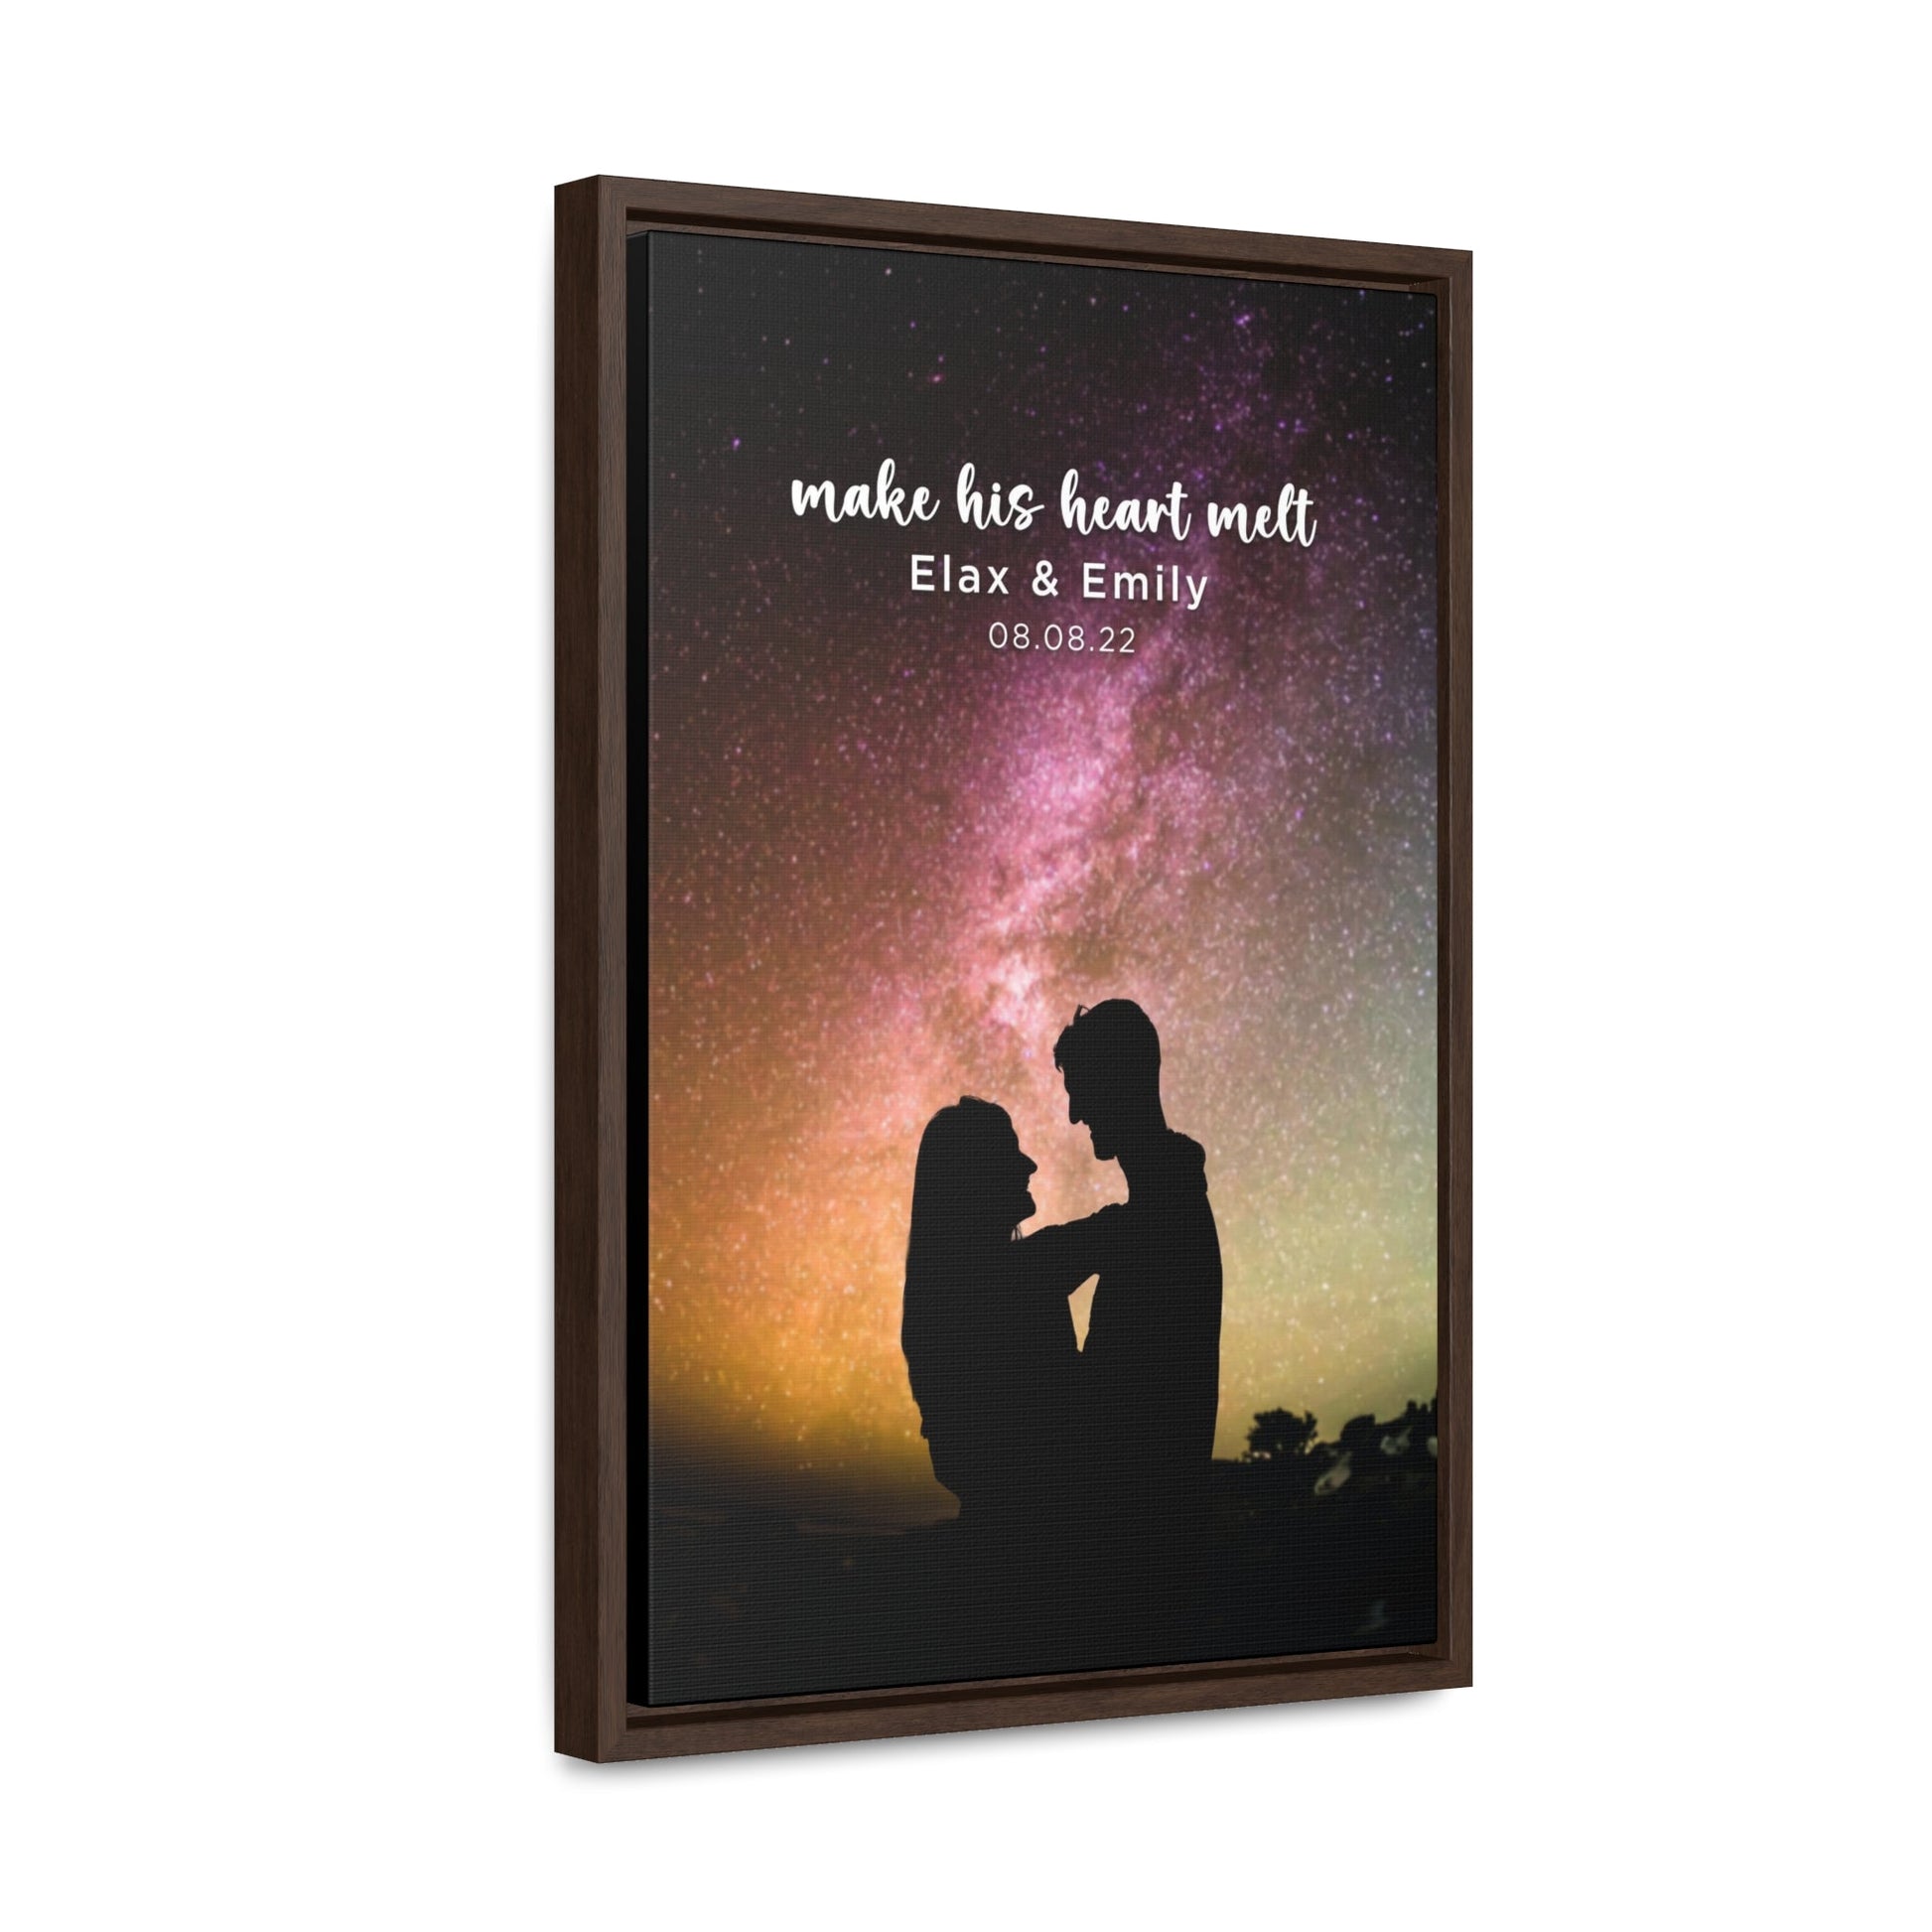 Personalized stars and meeting spot artwork in stitched elegant framing.